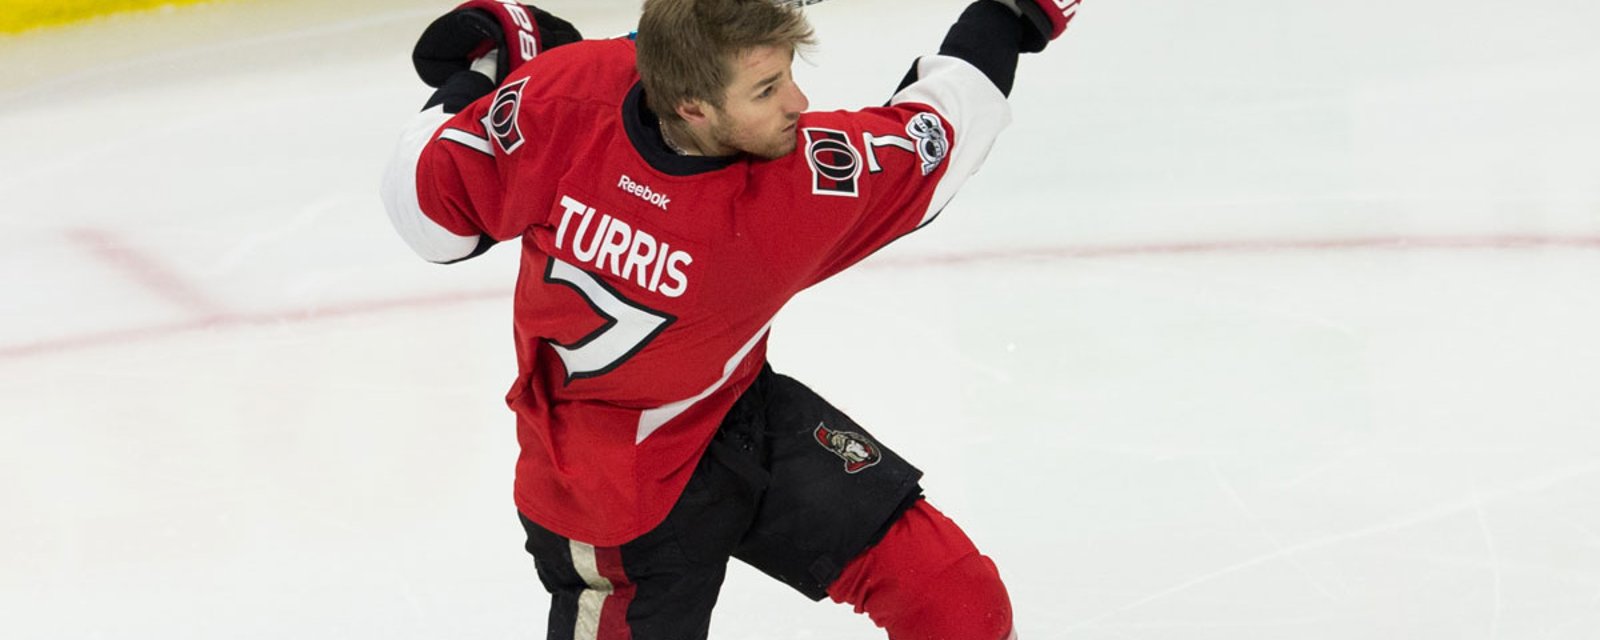 “No panic” in Turris' contract extension talks, says GM 